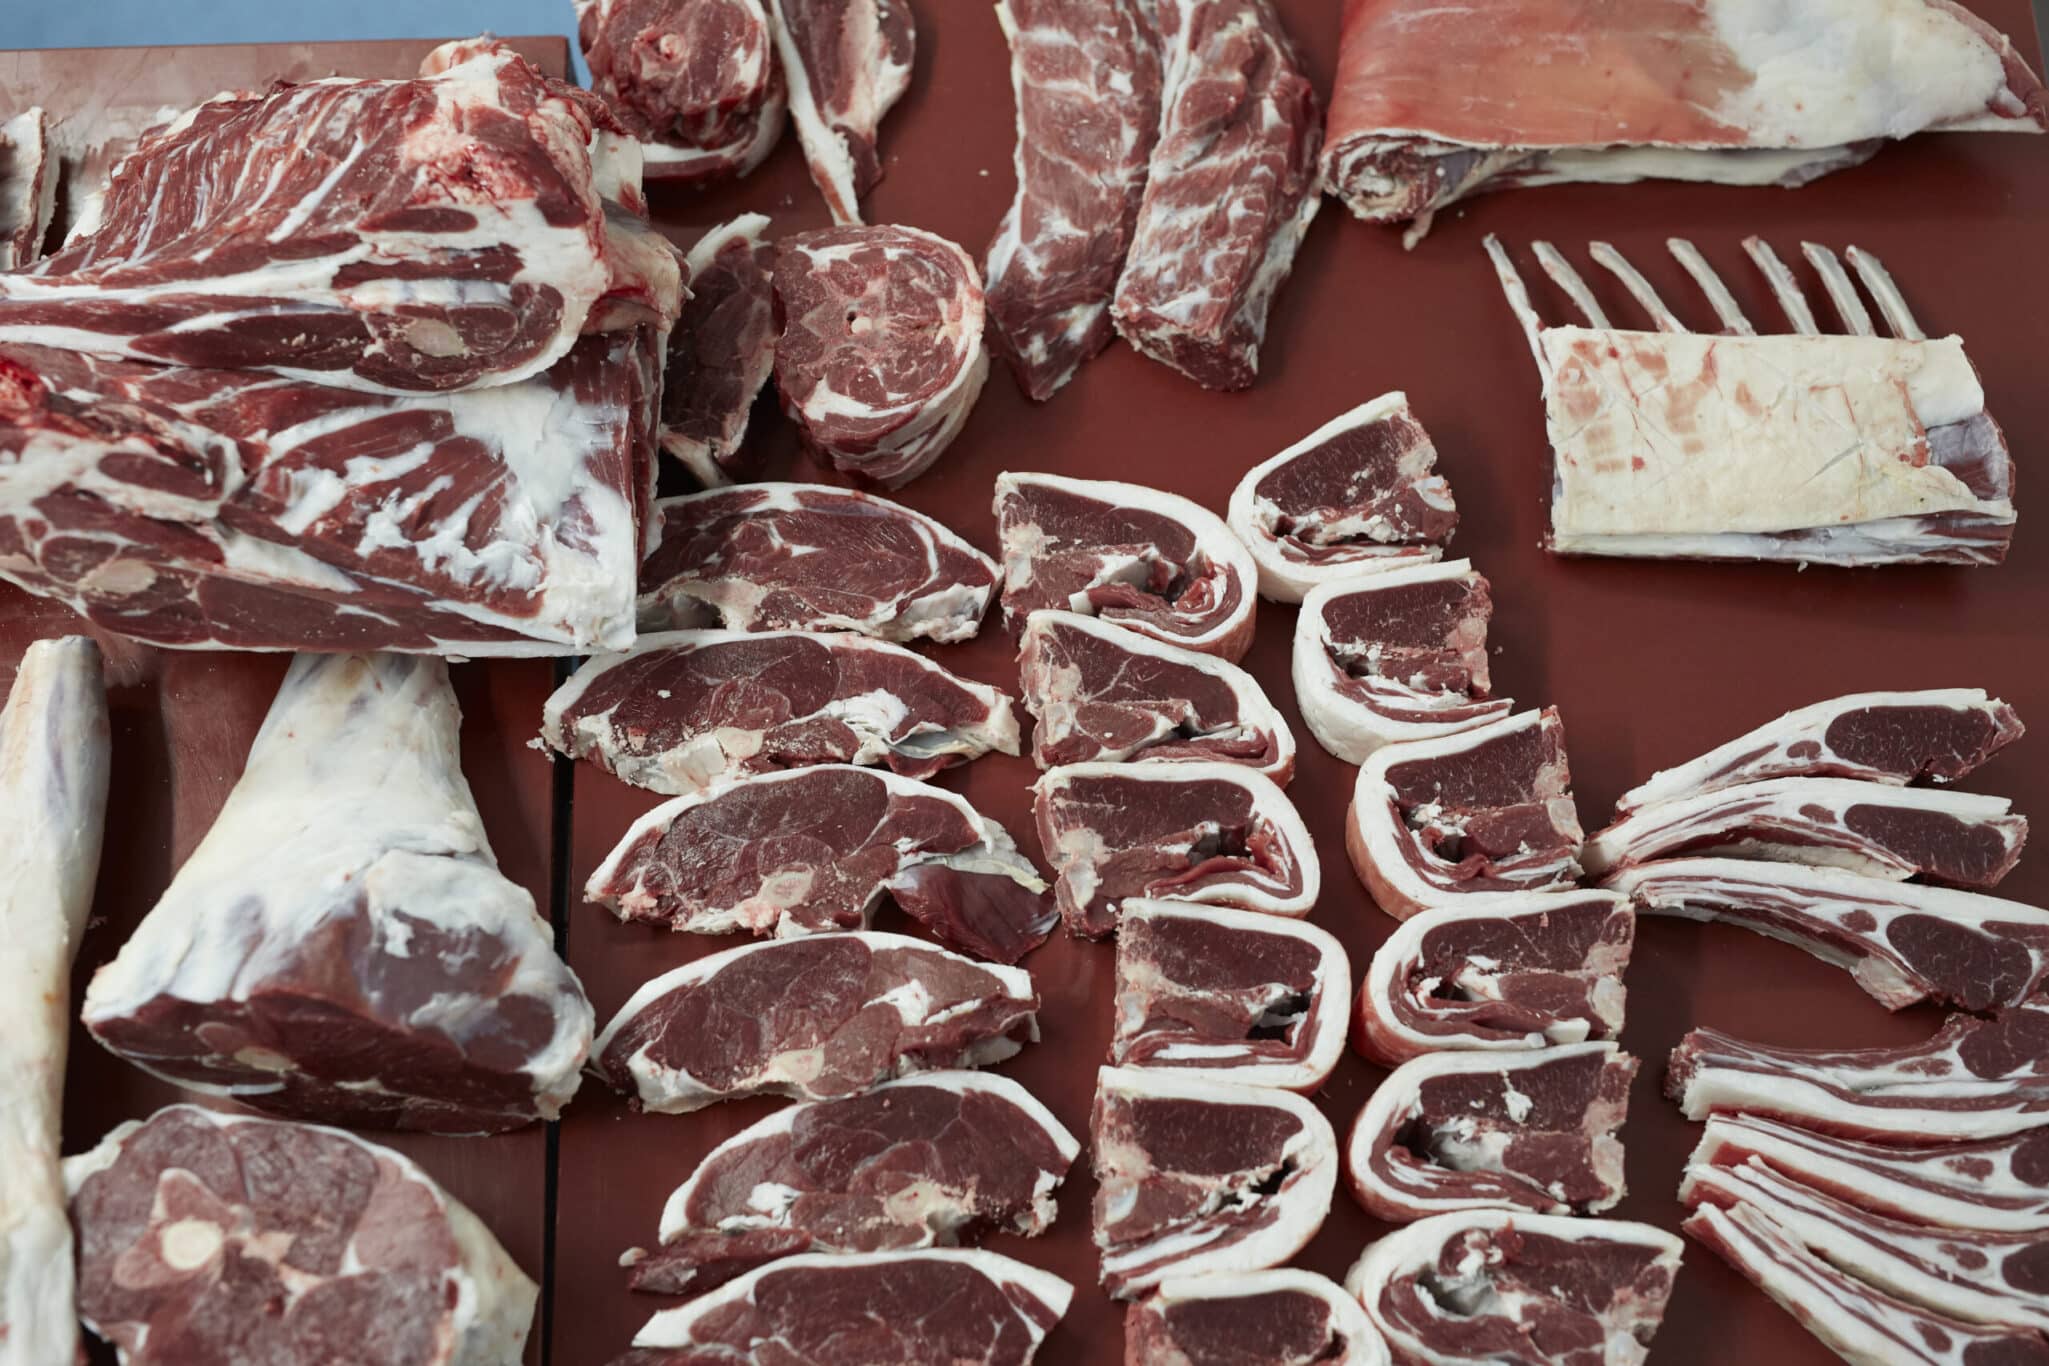 dressed chops and other cuts of hogget